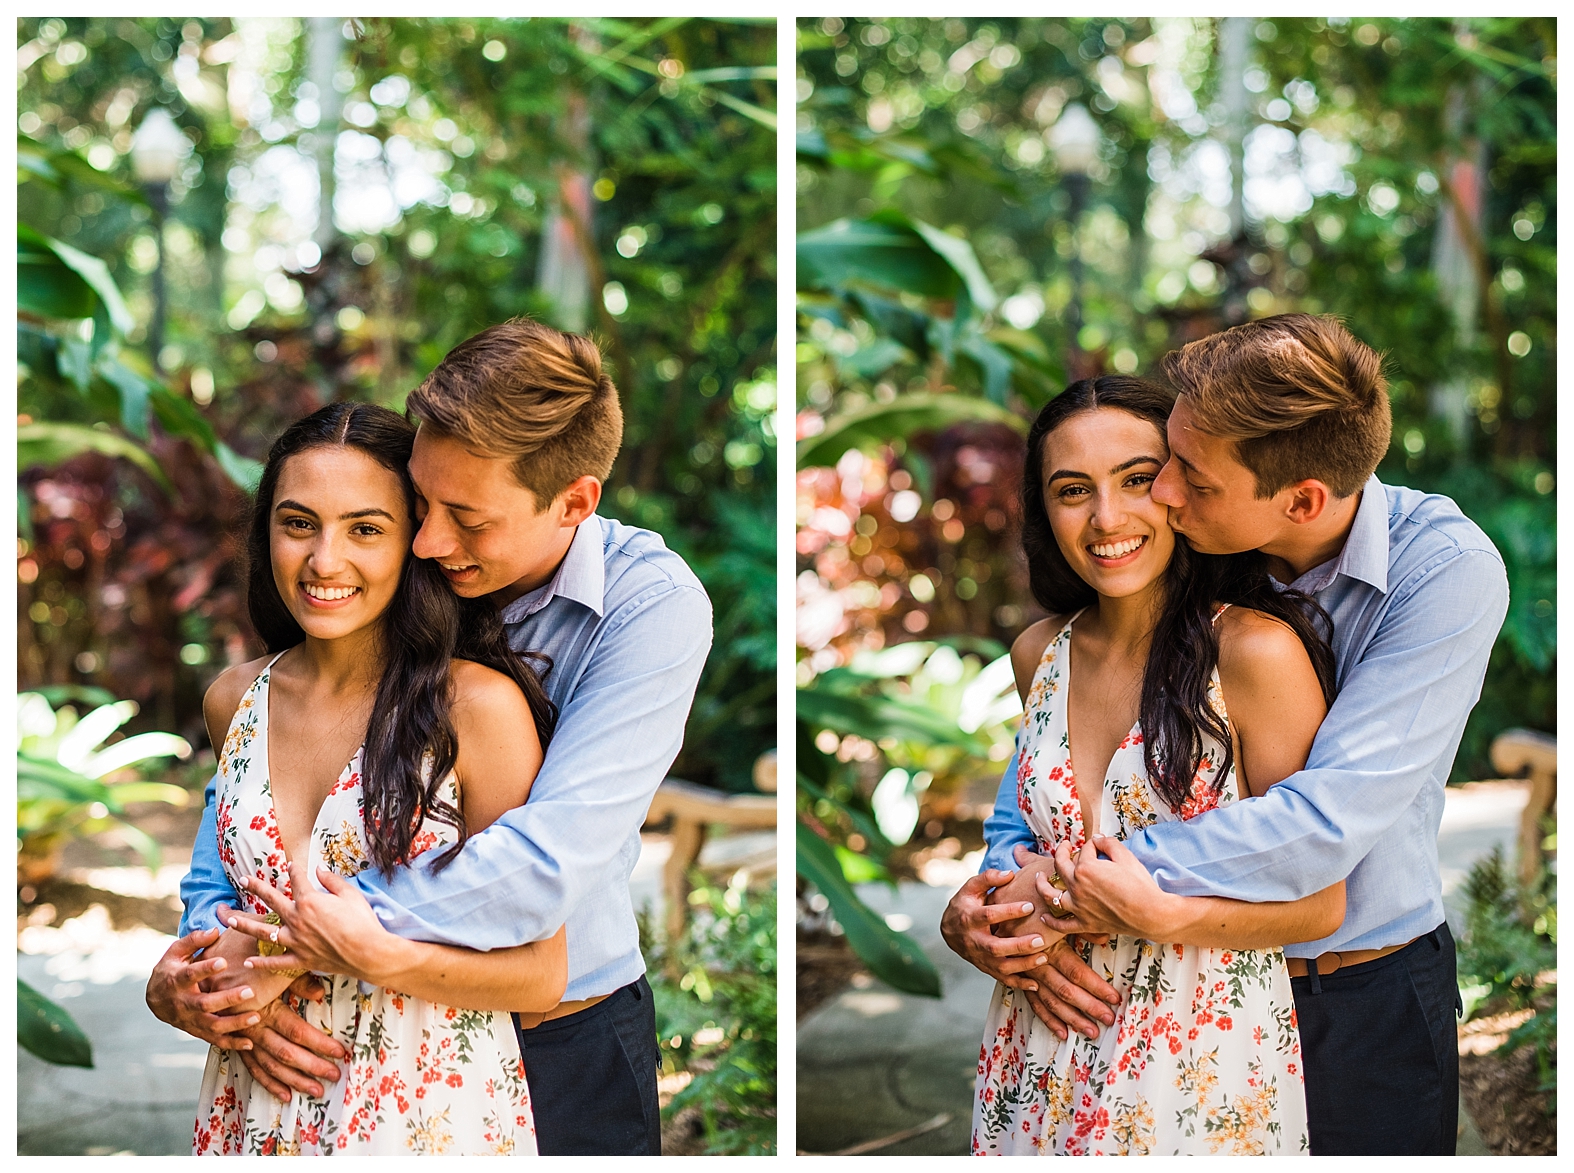 couple poses, go to couple poses, easy couple poses, hugging poses, interactive couple poses, sweet couple poses, loving couple poses, go to engagement poses, engagement session, st petersburg engagement photographer, st petersburg wedding photographer, st petersburg engagement session, wedding at sunken gardens, engagement session at sunken garden, mix race couple